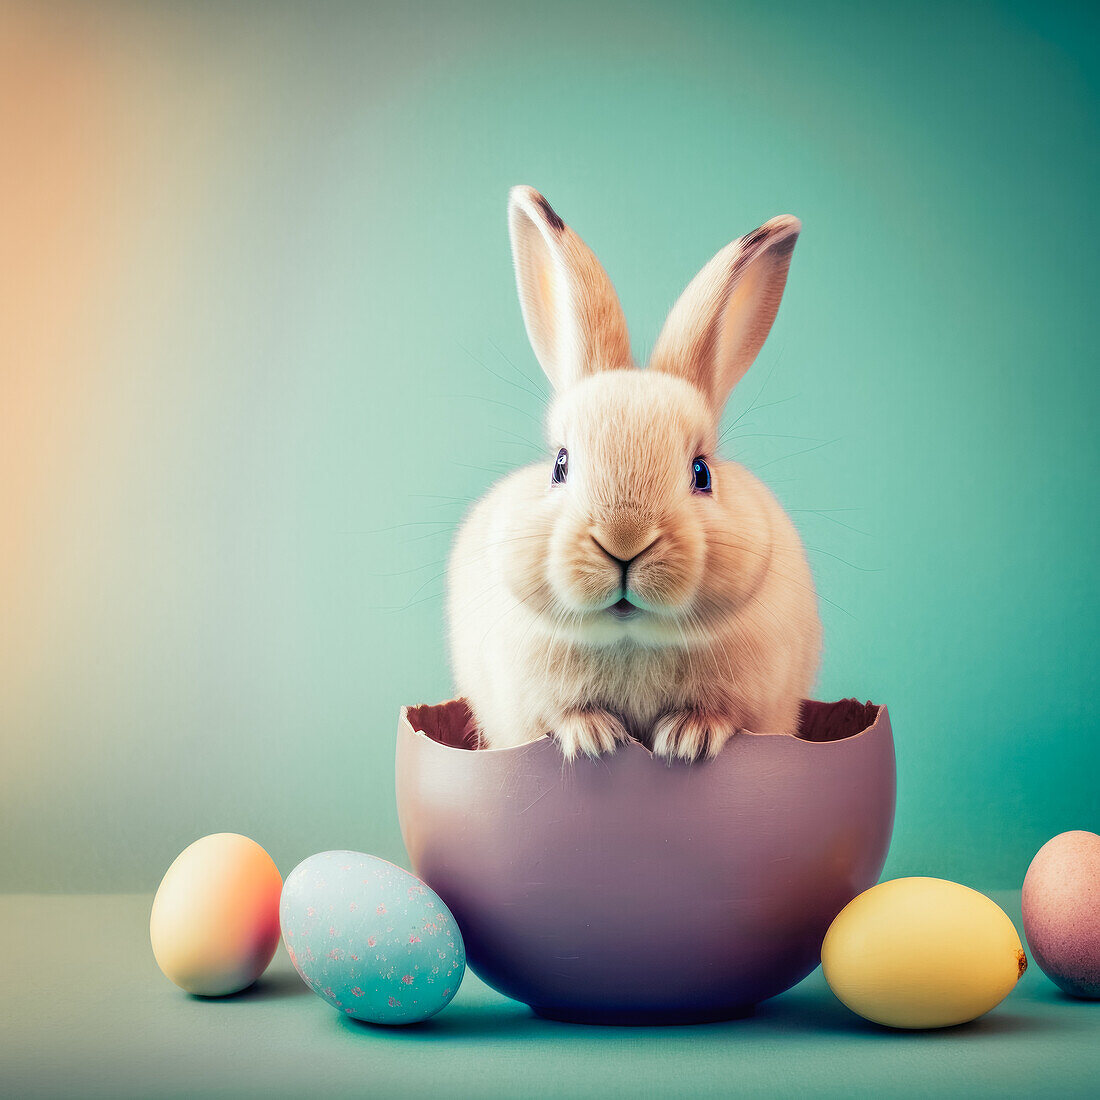 Cute fluffy bunny with beige fur and long ears sitting in eggshell on turquoise background near colorful Easter eggs